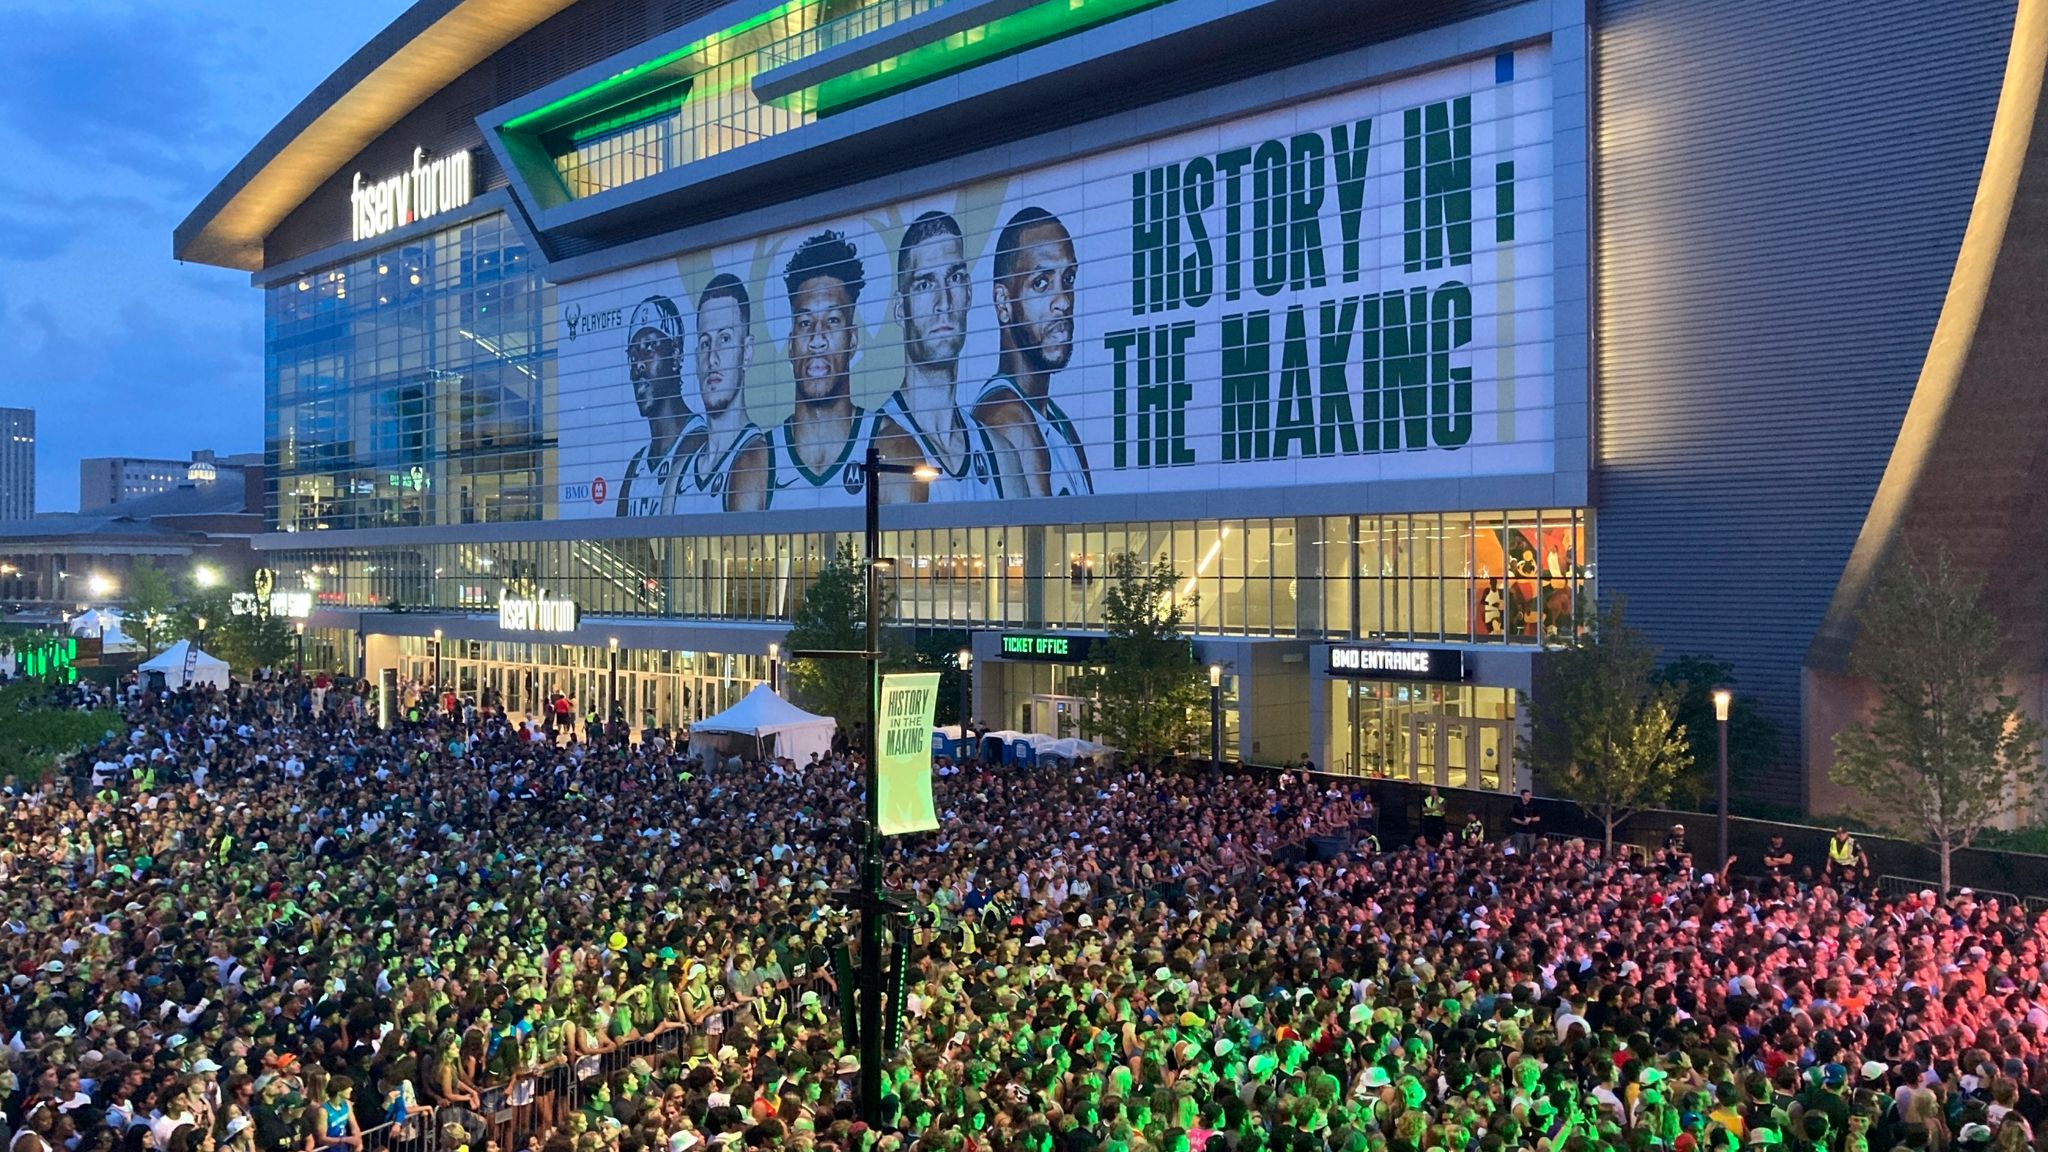 The Milwaukee Bucks are NBA Champions. Time to gear up.